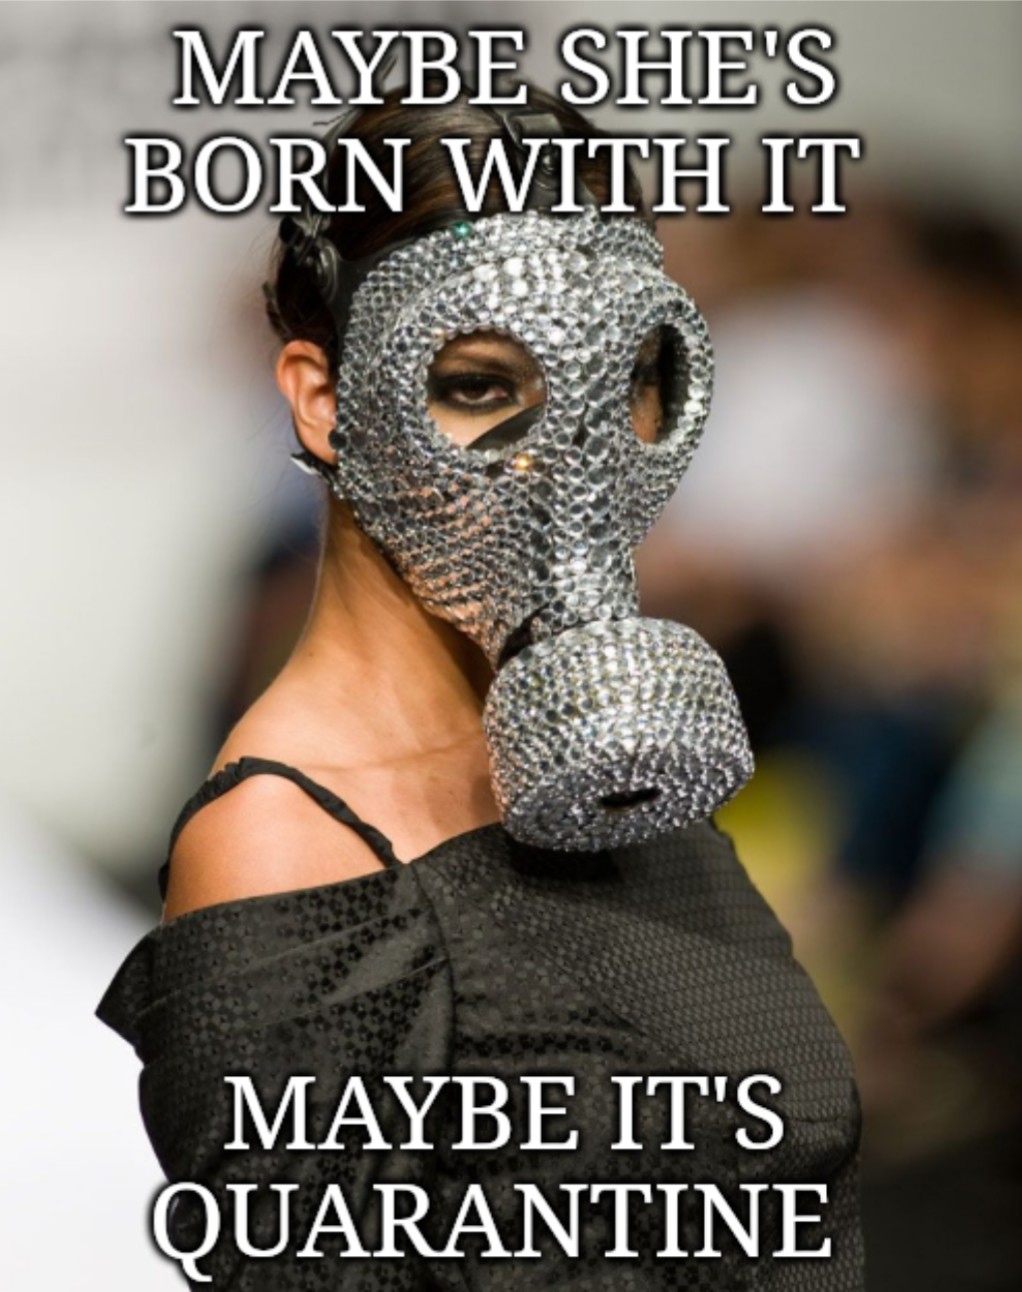 gas mask fashion - Maybe She'S Born With It Maybe It'S Quarantine